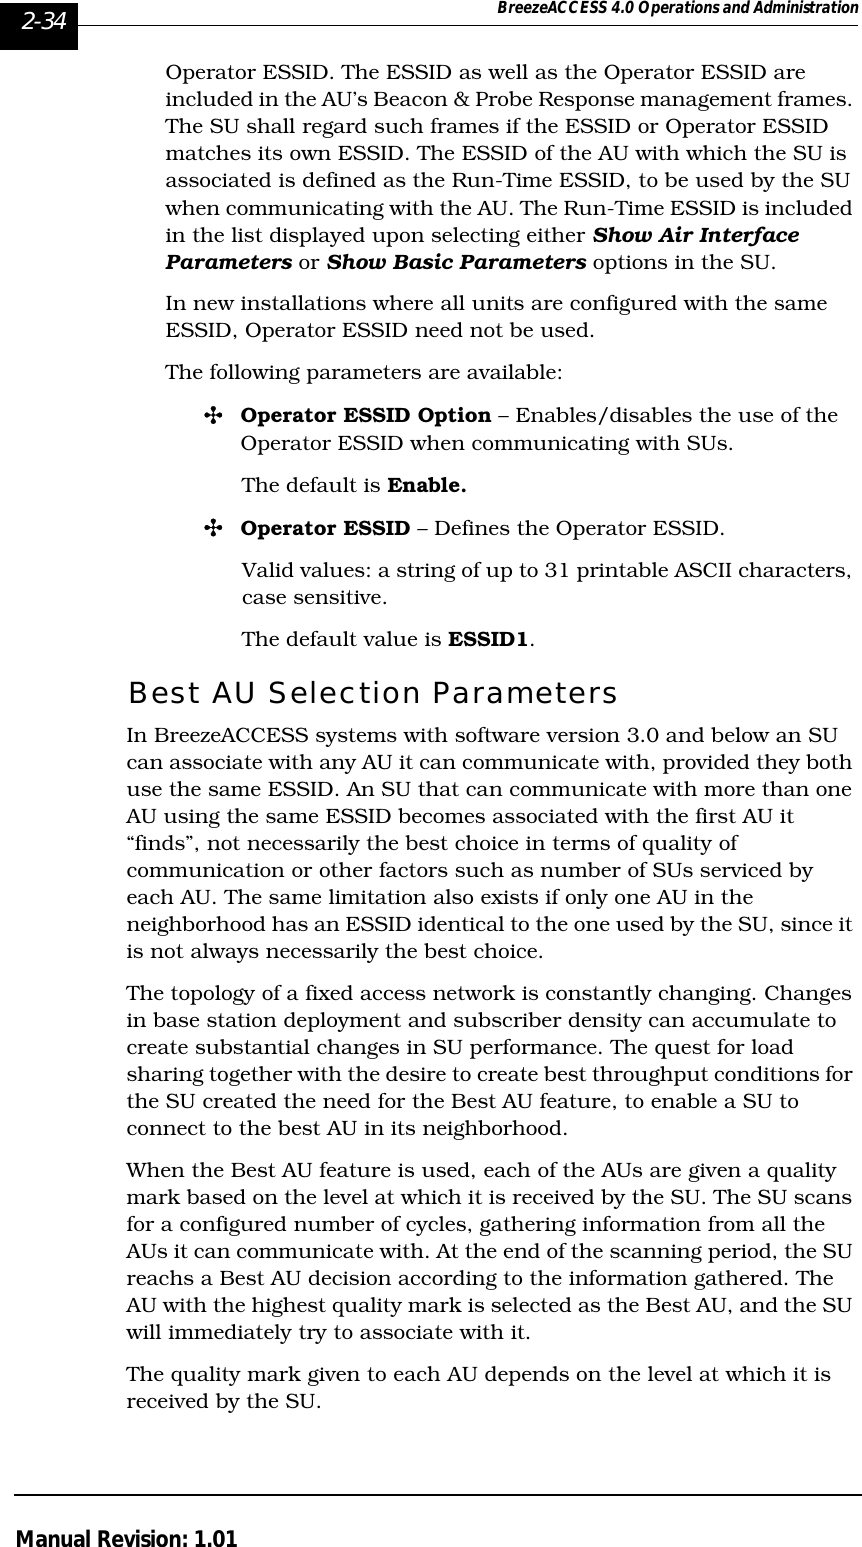 2-34 BreezeACCESS 4.0 Operations and AdministrationManual Revision: 1.01Operator ESSID. The ESSID as well as the Operator ESSID are included in the AU’s Beacon &amp; Probe Response management frames. The SU shall regard such frames if the ESSID or Operator ESSID matches its own ESSID. The ESSID of the AU with which the SU is associated is defined as the Run-Time ESSID, to be used by the SU when communicating with the AU. The Run-Time ESSID is included in the list displayed upon selecting either Show Air Interface Parameters or Show Basic Parameters options in the SU. In new installations where all units are configured with the same ESSID, Operator ESSID need not be used.The following parameters are available:&quot;Operator ESSID Option – Enables/disables the use of the Operator ESSID when communicating with SUs.The default is Enable.&quot;Operator ESSID – Defines the Operator ESSID.Valid values: a string of up to 31 printable ASCII characters, case sensitive.The default value is ESSID1. Best AU Selection Parameters In BreezeACCESS systems with software version 3.0 and below an SU can associate with any AU it can communicate with, provided they both use the same ESSID. An SU that can communicate with more than one AU using the same ESSID becomes associated with the first AU it “finds”, not necessarily the best choice in terms of quality of communication or other factors such as number of SUs serviced by each AU. The same limitation also exists if only one AU in the neighborhood has an ESSID identical to the one used by the SU, since it is not always necessarily the best choice. The topology of a fixed access network is constantly changing. Changes in base station deployment and subscriber density can accumulate to create substantial changes in SU performance. The quest for load sharing together with the desire to create best throughput conditions for the SU created the need for the Best AU feature, to enable a SU to connect to the best AU in its neighborhood. When the Best AU feature is used, each of the AUs are given a quality mark based on the level at which it is received by the SU. The SU scans for a configured number of cycles, gathering information from all the AUs it can communicate with. At the end of the scanning period, the SU reachs a Best AU decision according to the information gathered. The AU with the highest quality mark is selected as the Best AU, and the SU will immediately try to associate with it.The quality mark given to each AU depends on the level at which it is received by the SU.